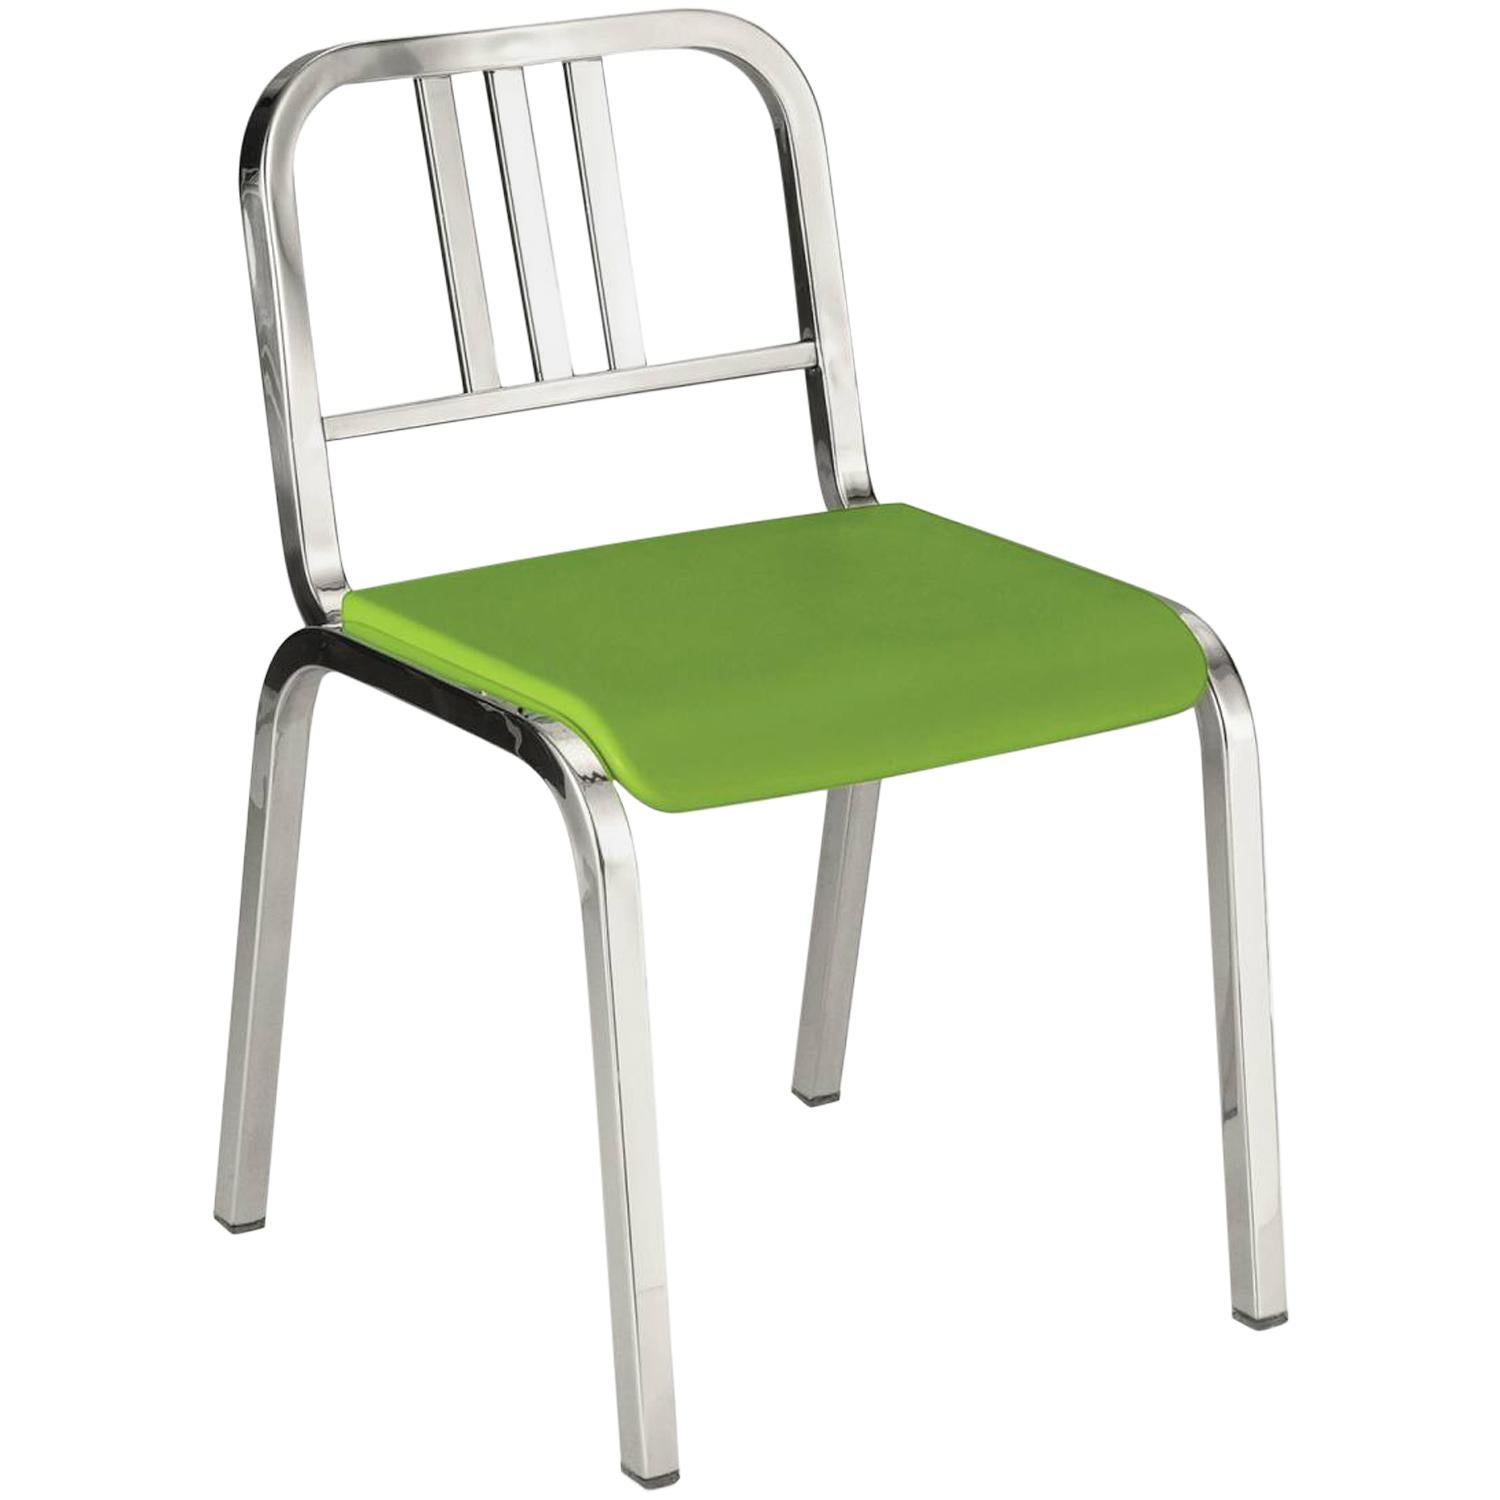 Emeco Nine-0 Chair in Polished Aluminum with Green Seat by Ettore Sottsass